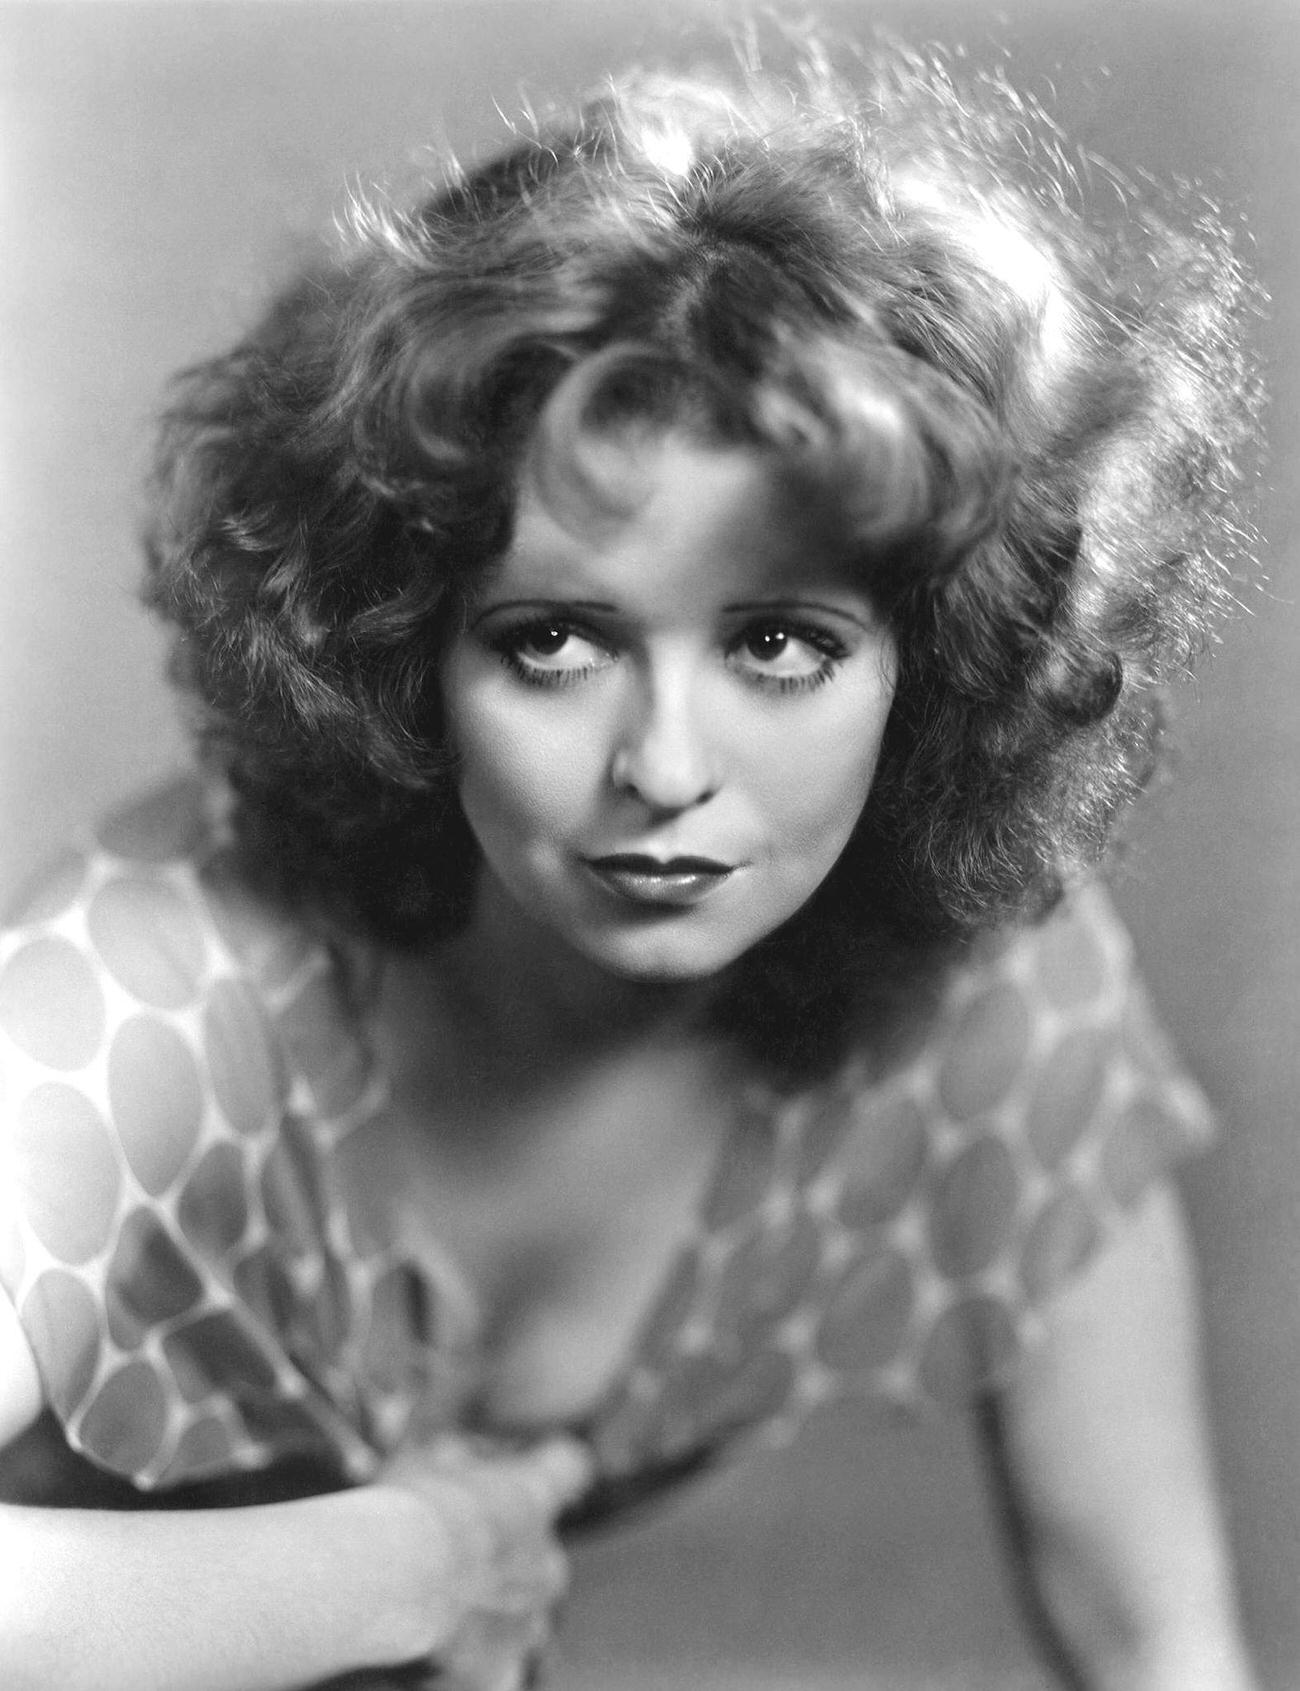 Clara Bow and Her Iconic Role as a Flapper in These Stunning Photo